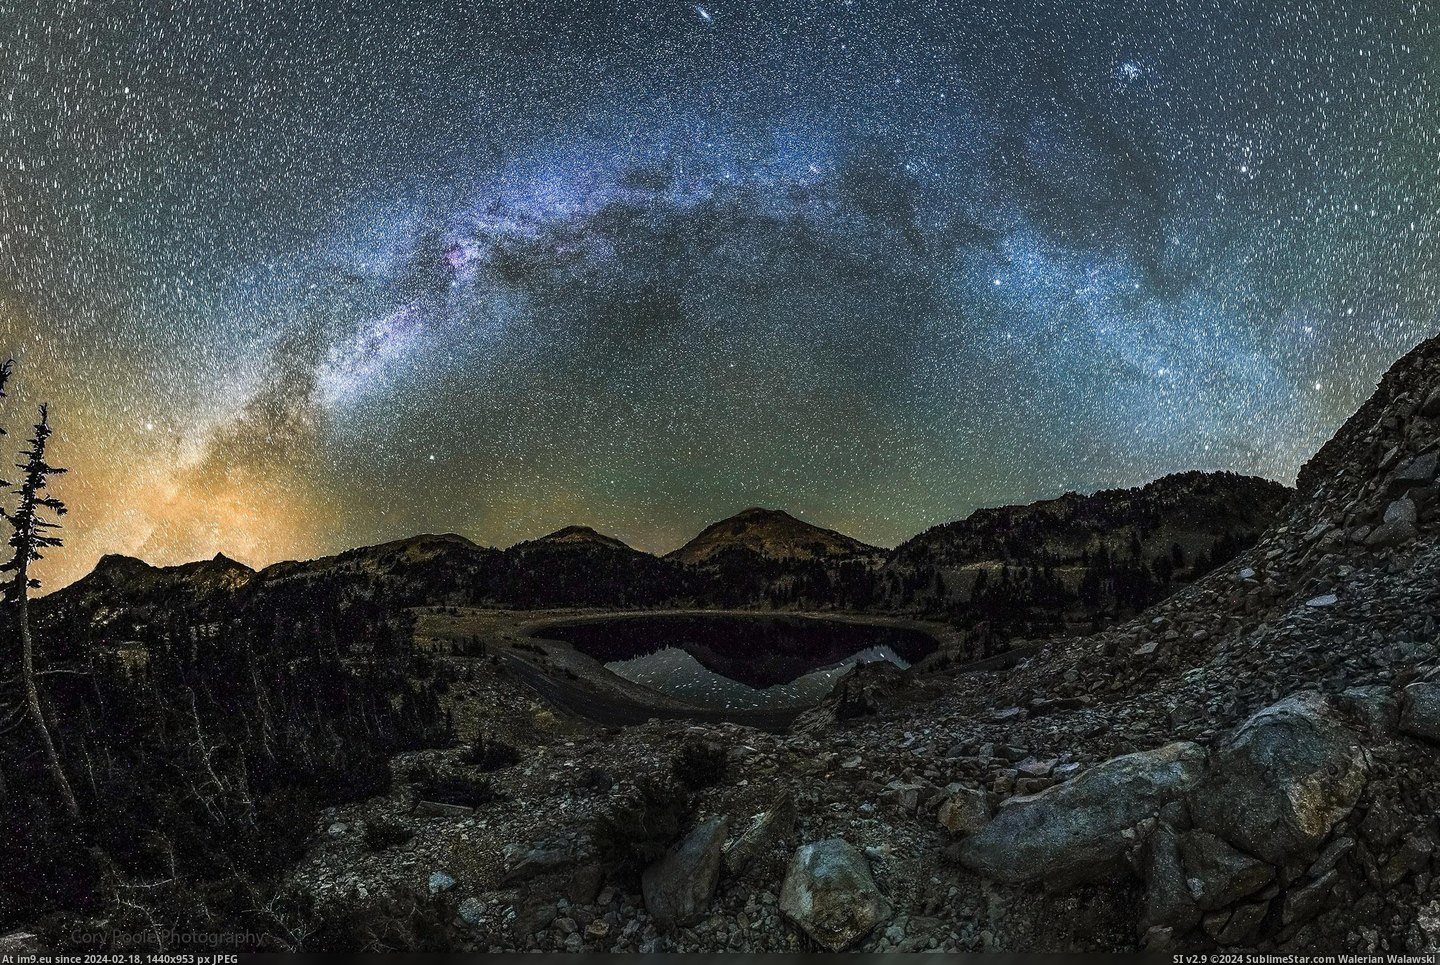 #Park #National #Lake #California #Volcanic #Lassen #Helen #Way #Northern #Arches #Milky [Earthporn] The Milky Way arches over Mt. Lassen and Lake Helen in Lassen Volcanic National Park in Northern California. [2500x1 Pic. (Bild von album My r/EARTHPORN favs))